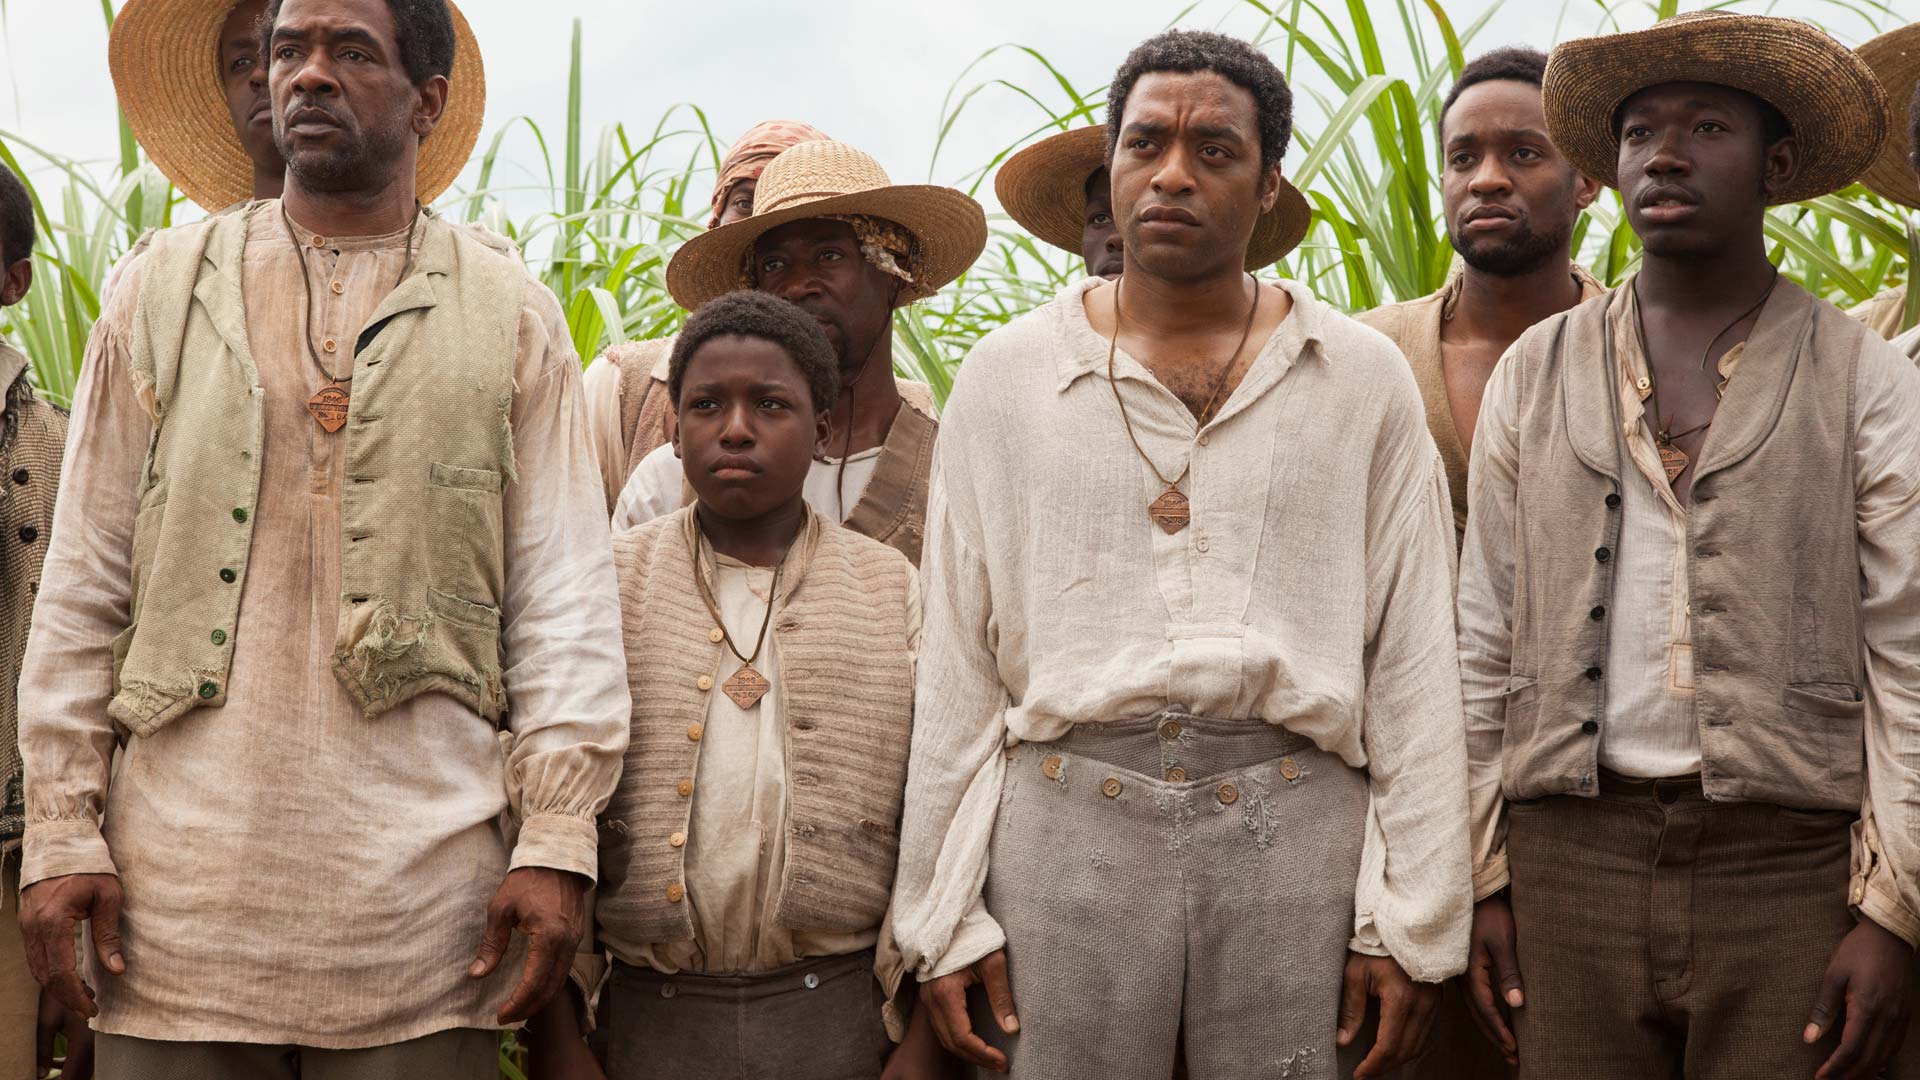 Chiewetel Eijiofor in 12 Years a Slave